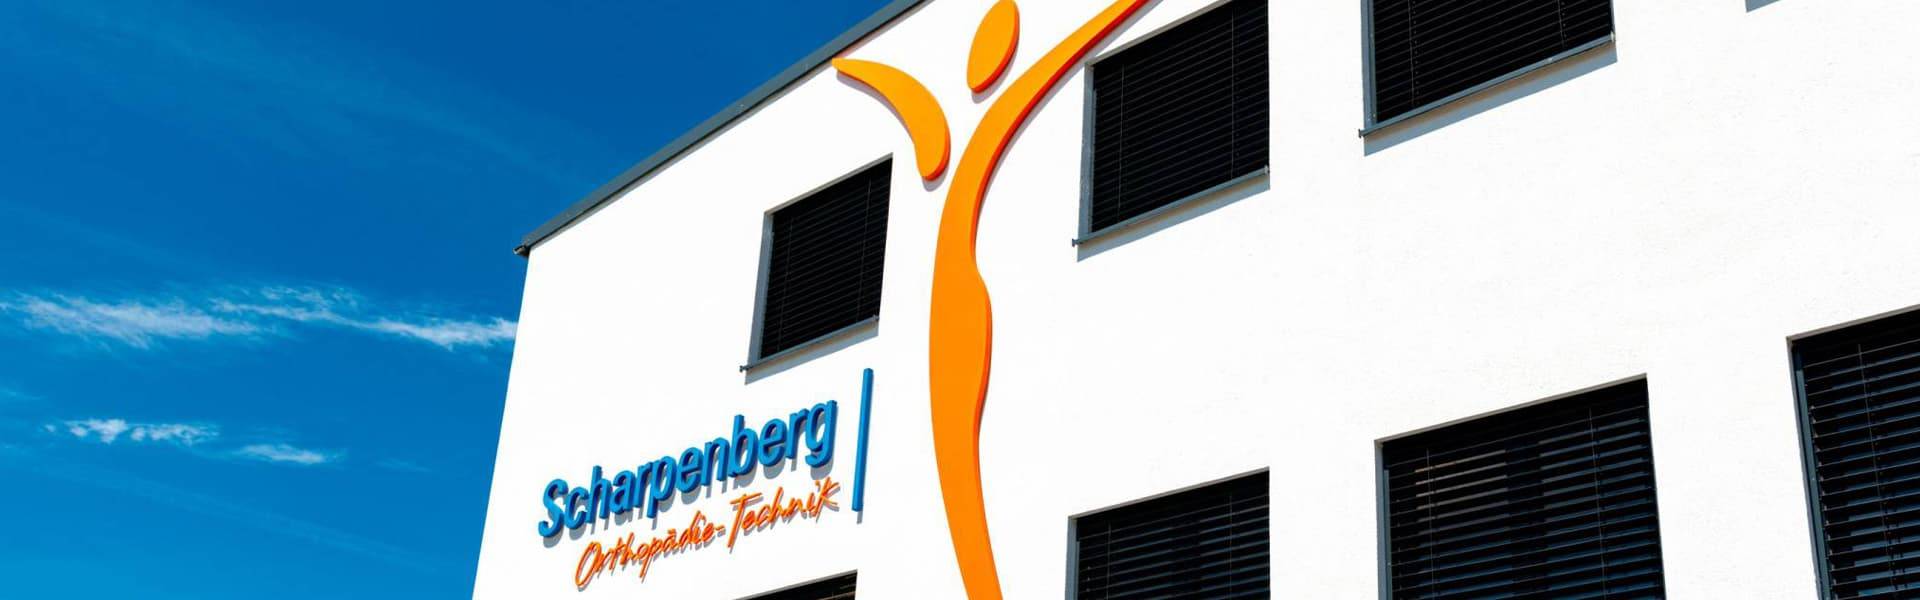 The headquarters of Orthopädie-Technik Scharpenberg with the logo on the wall of the building.